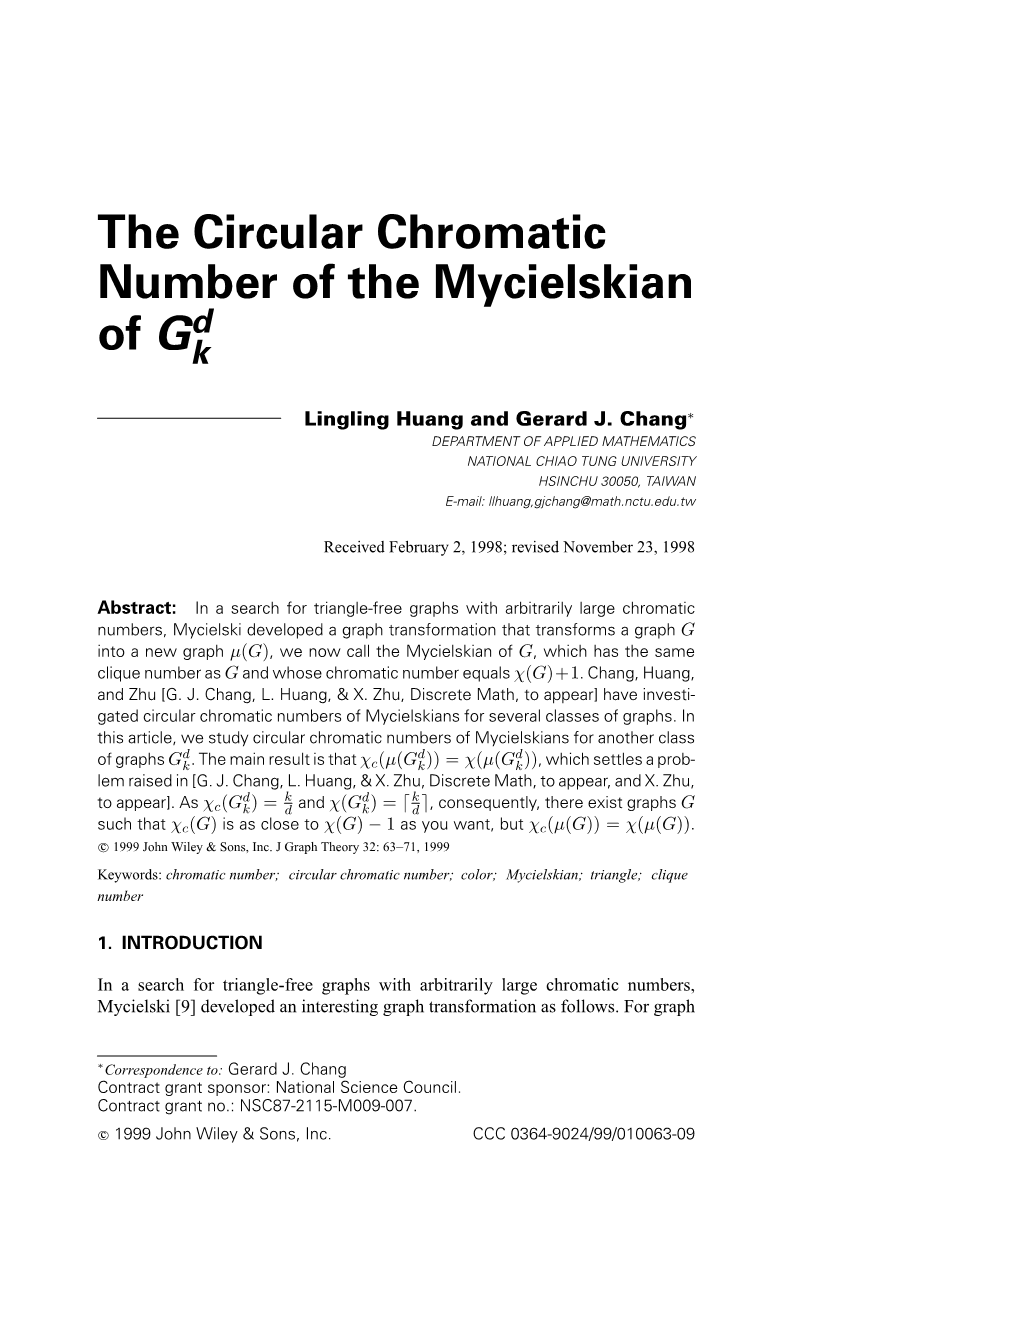 The Circular Chromatic Number of the Mycielskian Of